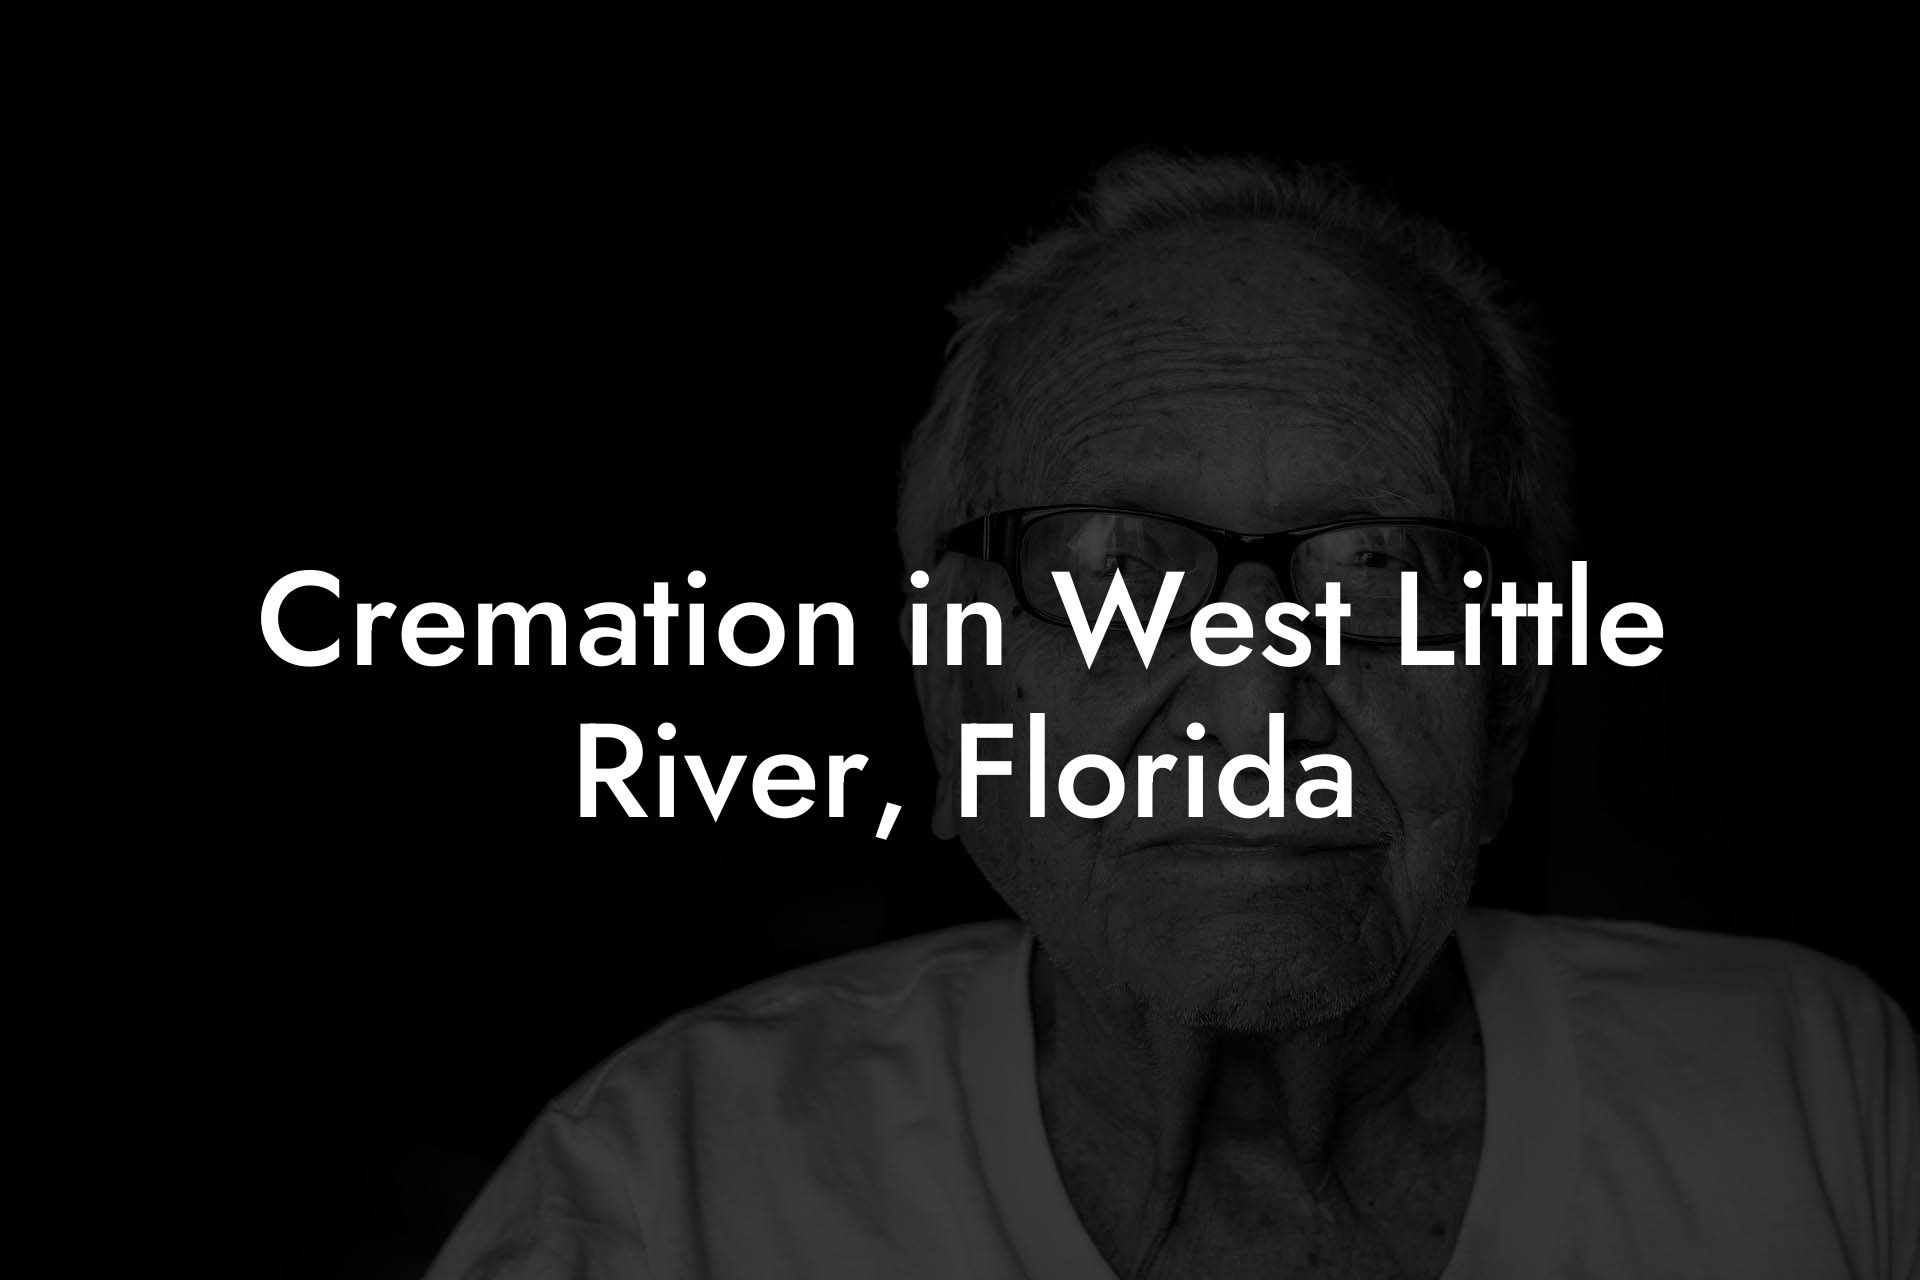 Cremation in West Little River, Florida